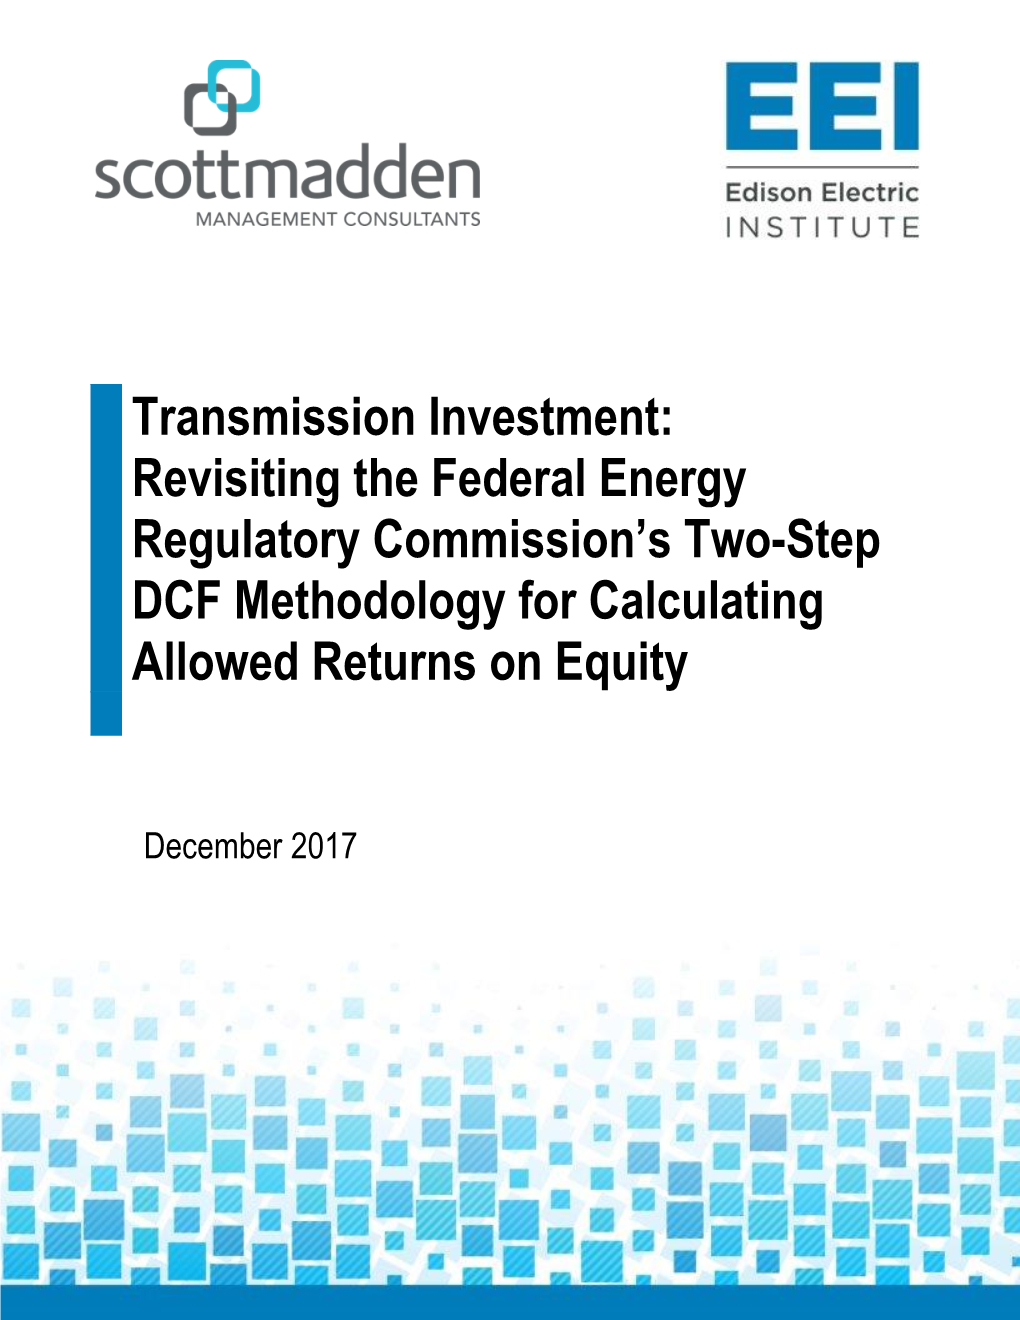 Transmission Investment: Revisiting the Federal Energy Regulatory Commission’S Two-Step DCF Methodology for Calculating Allowed Returns on Equity